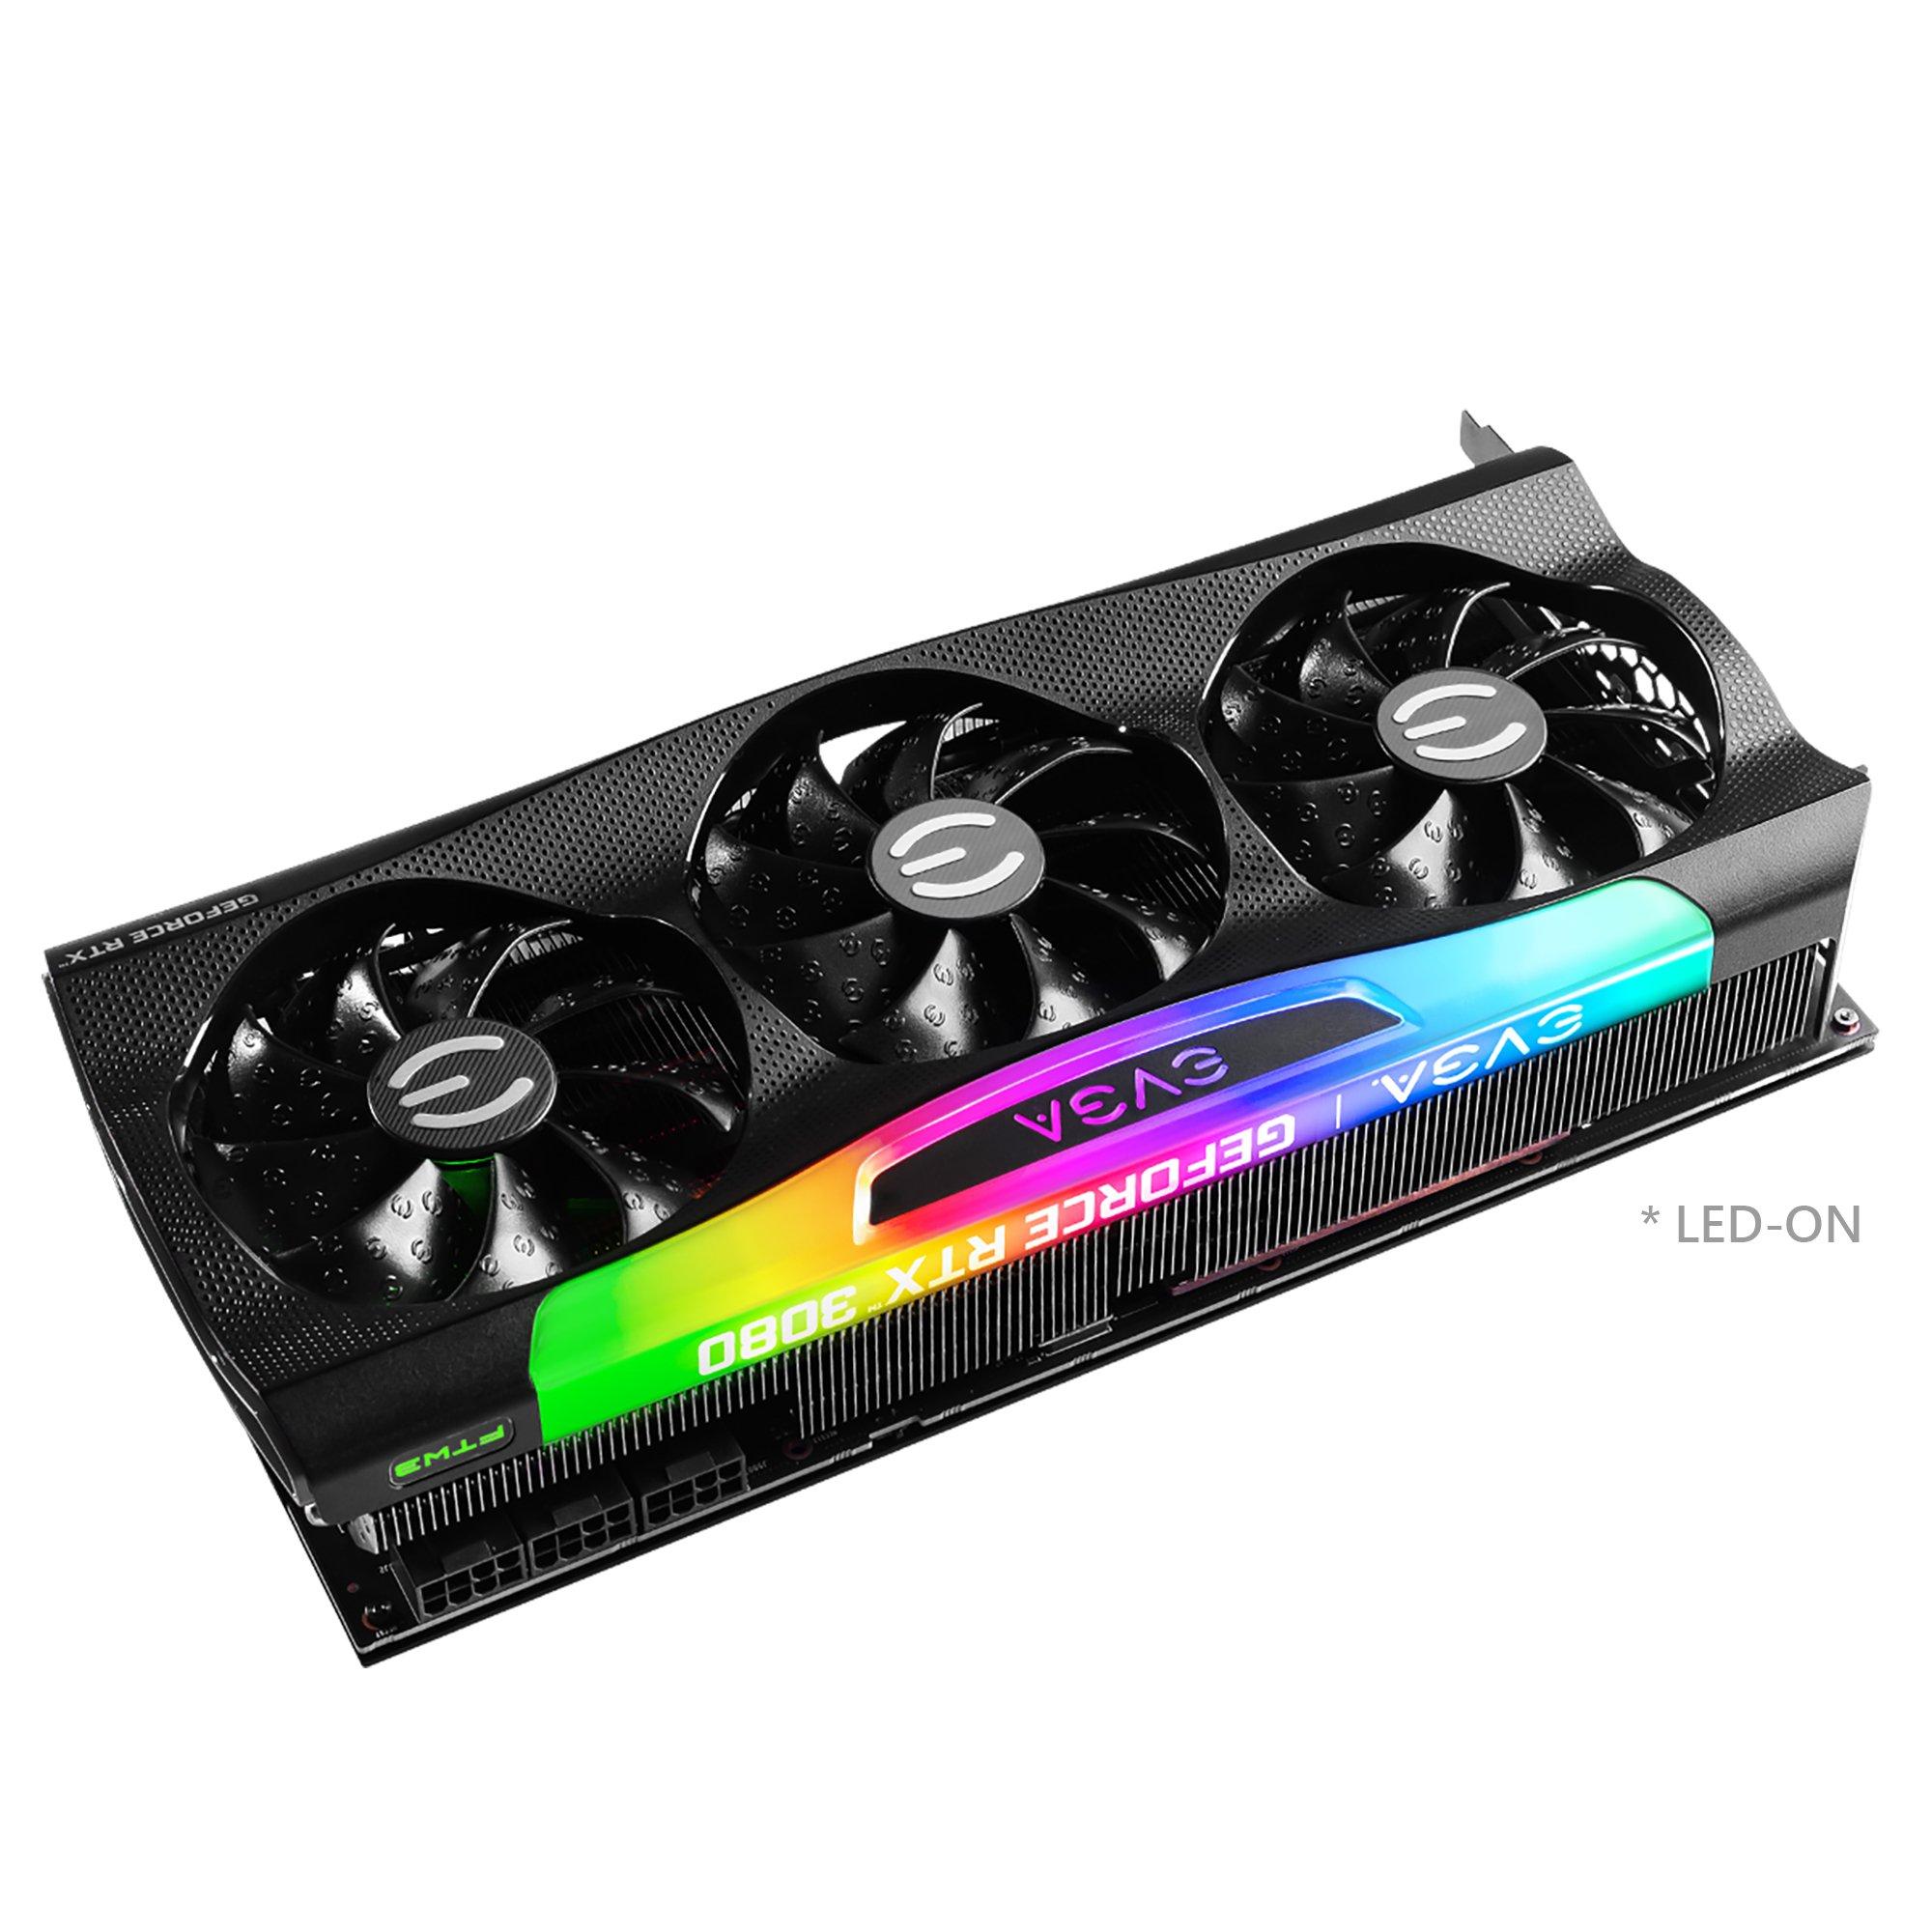 EVGA GeForce RTX 3080 FTW3 Ultra Gaming Graphics Card